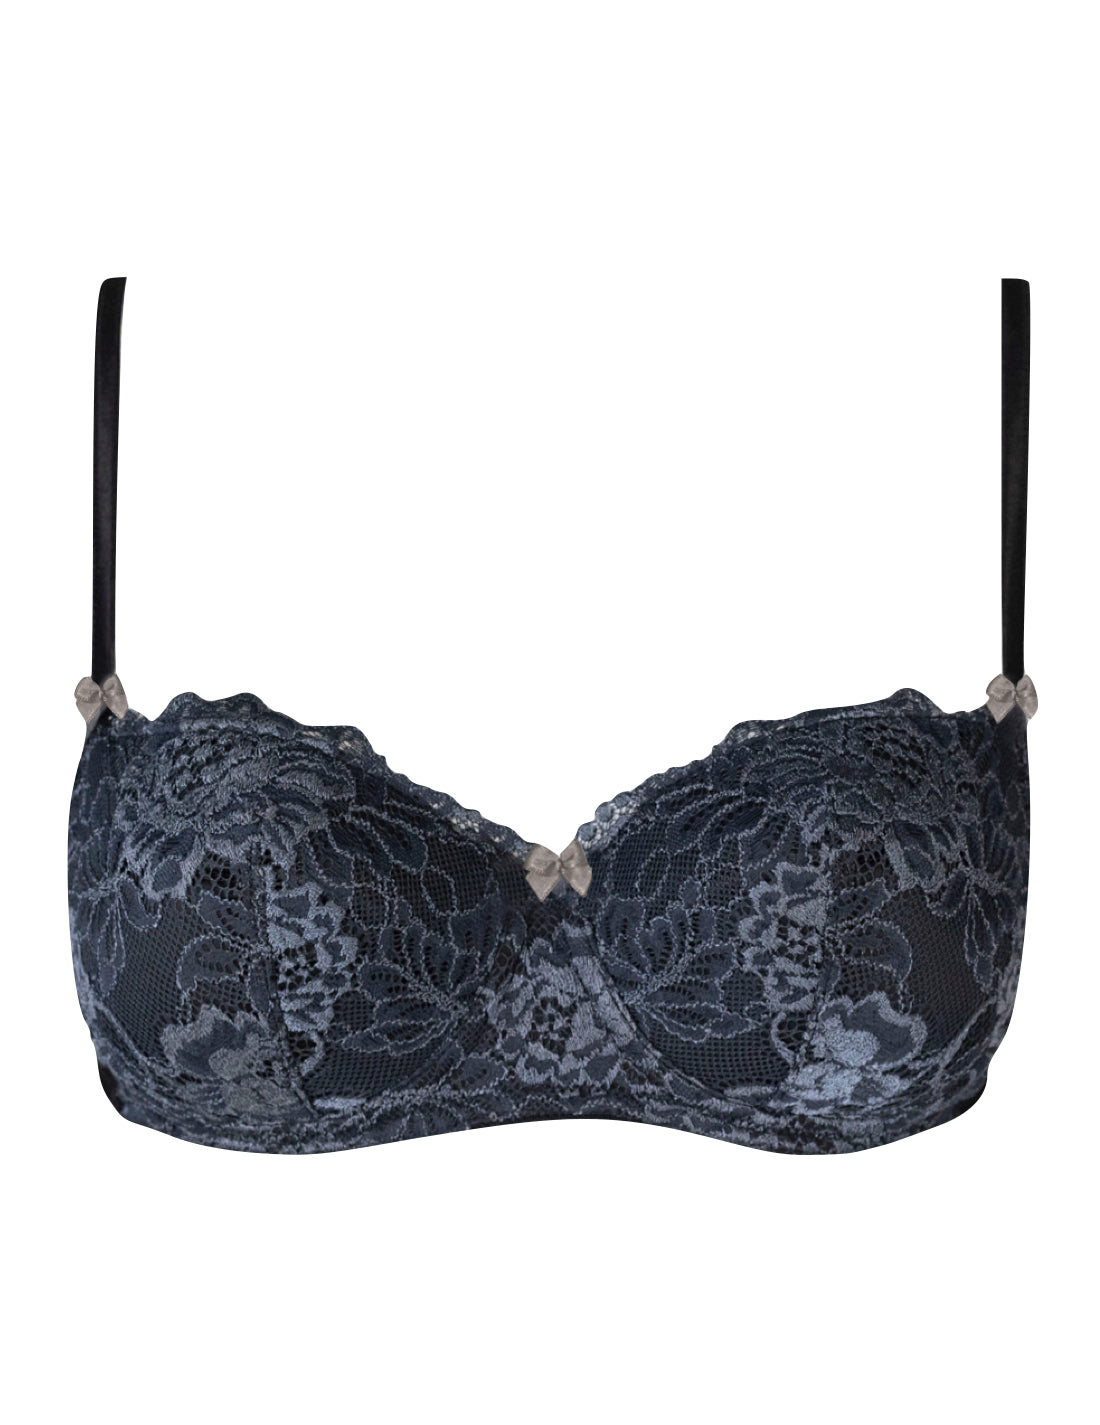 Mimi Holliday Finch Fully Padded Super Plunge with Raised Lace bra